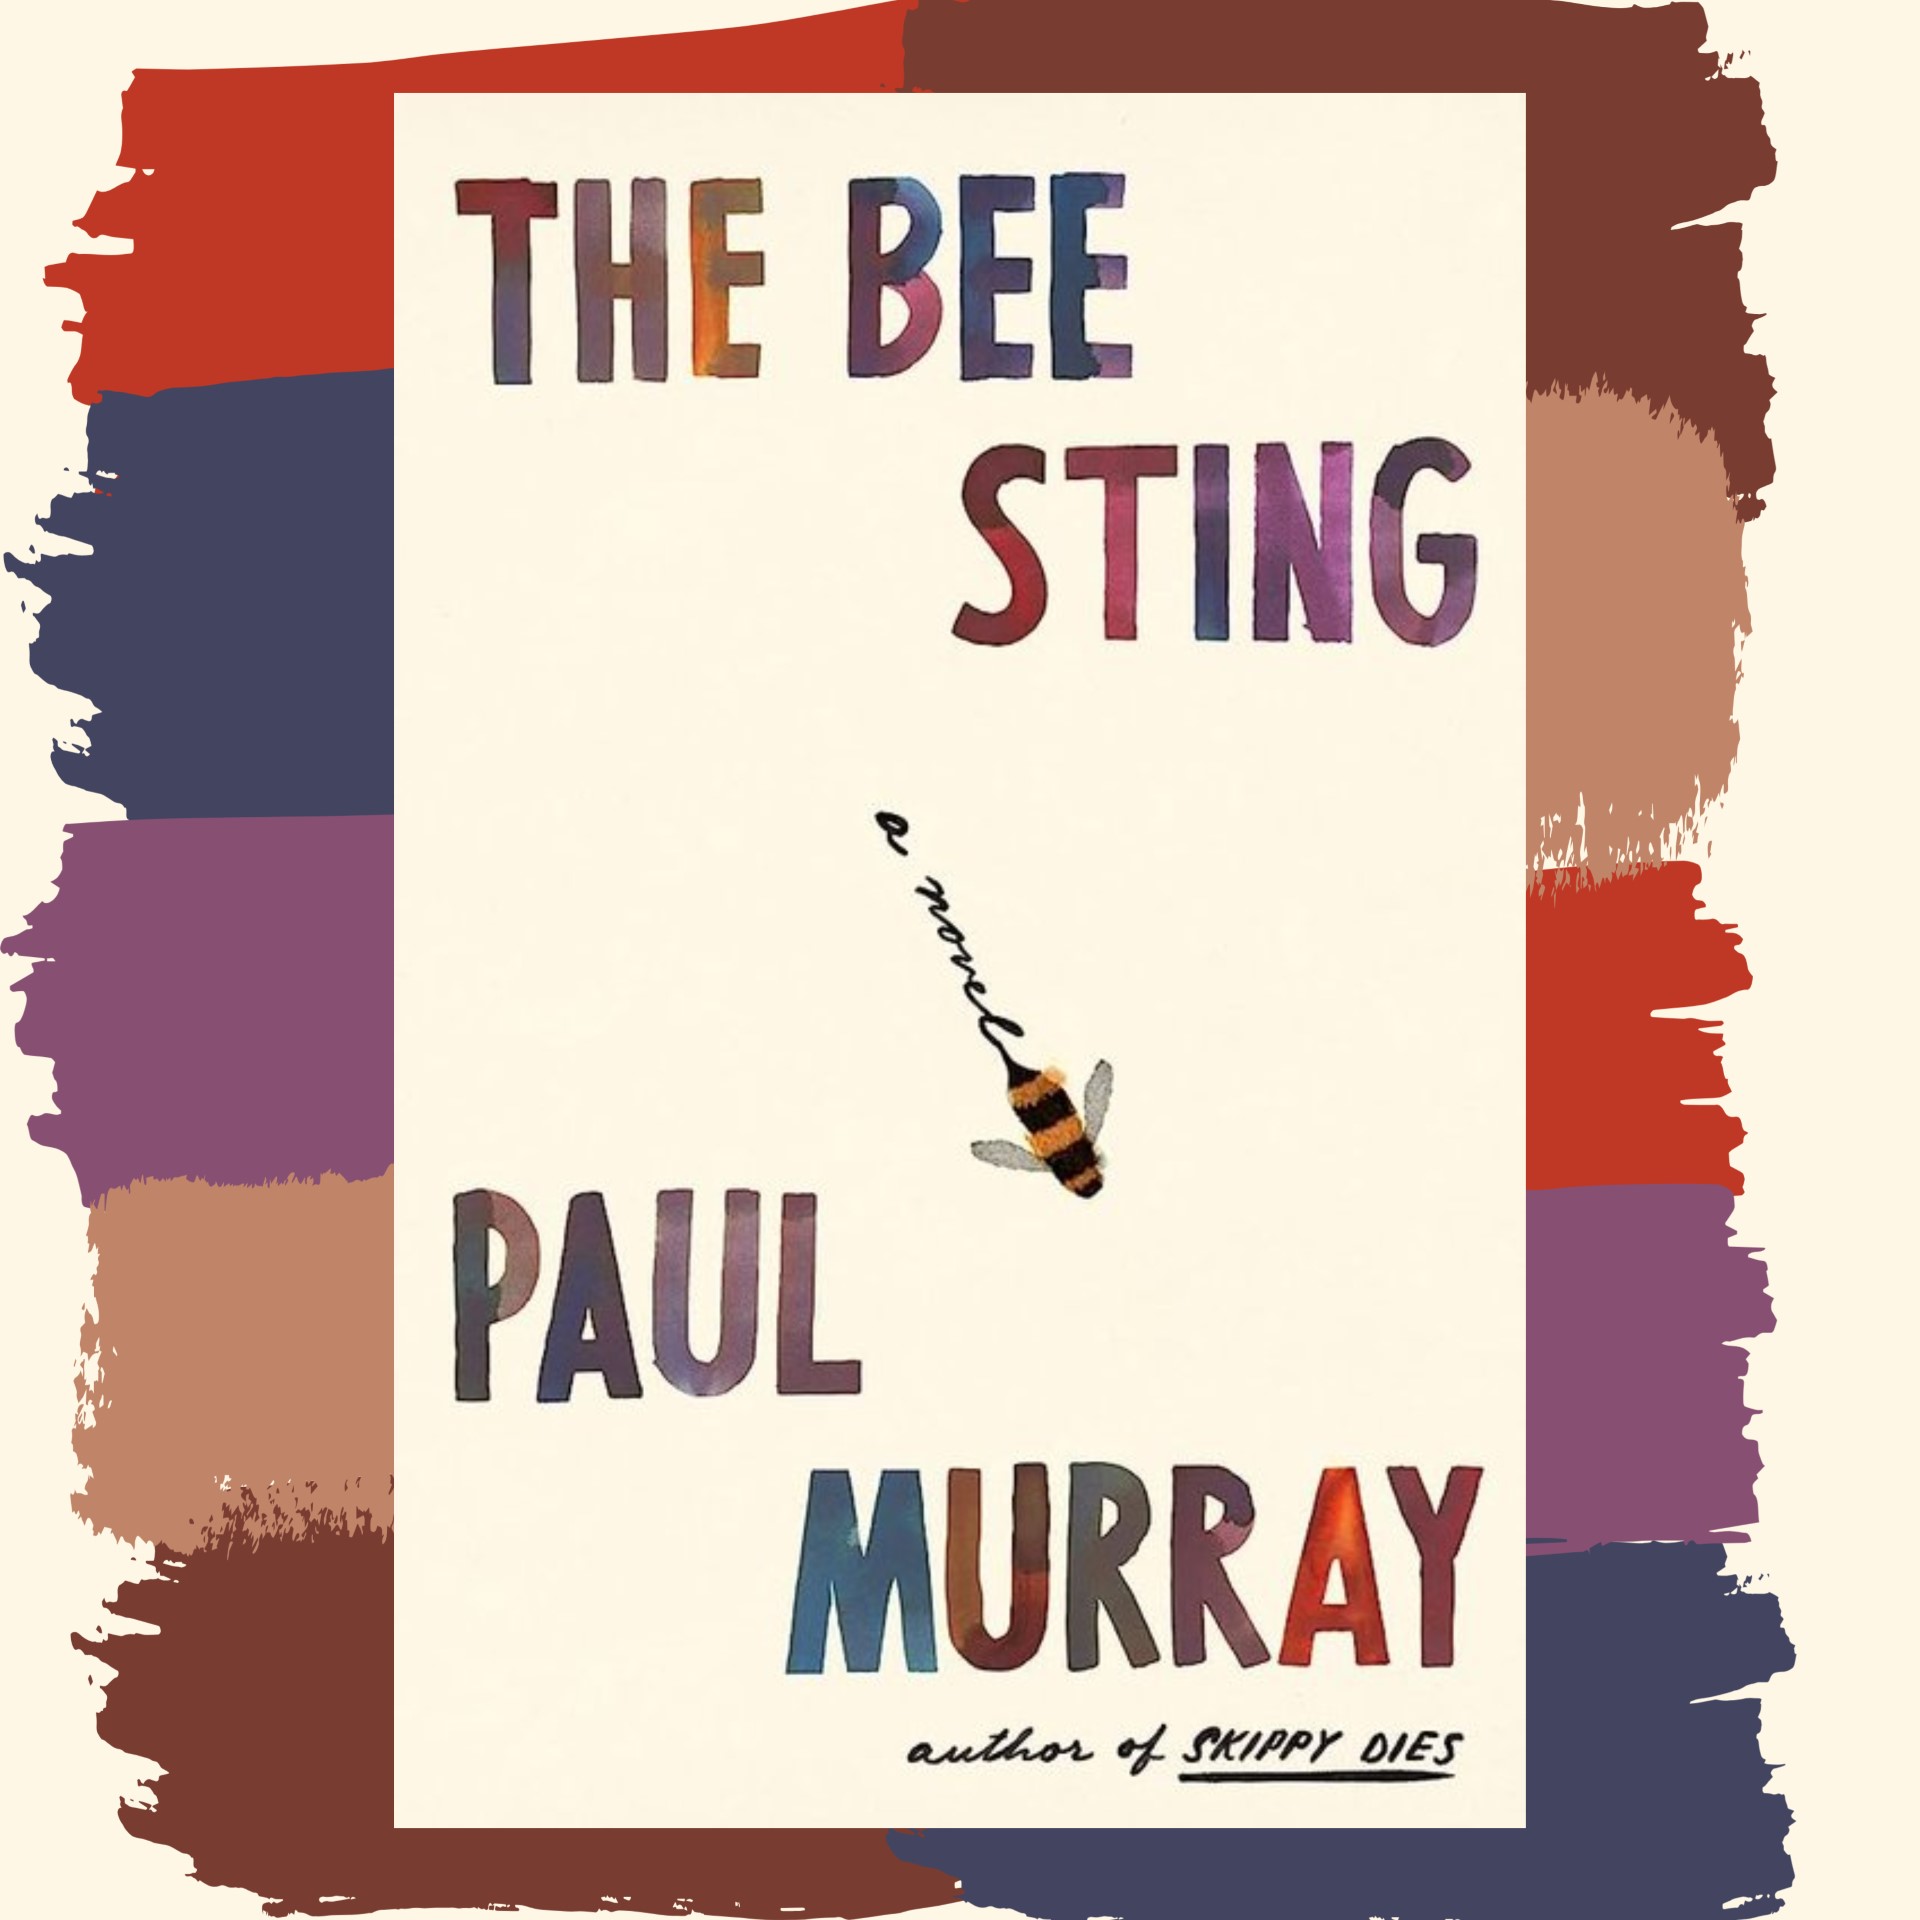 The Book Show | Paul Murray - The Bee Sting